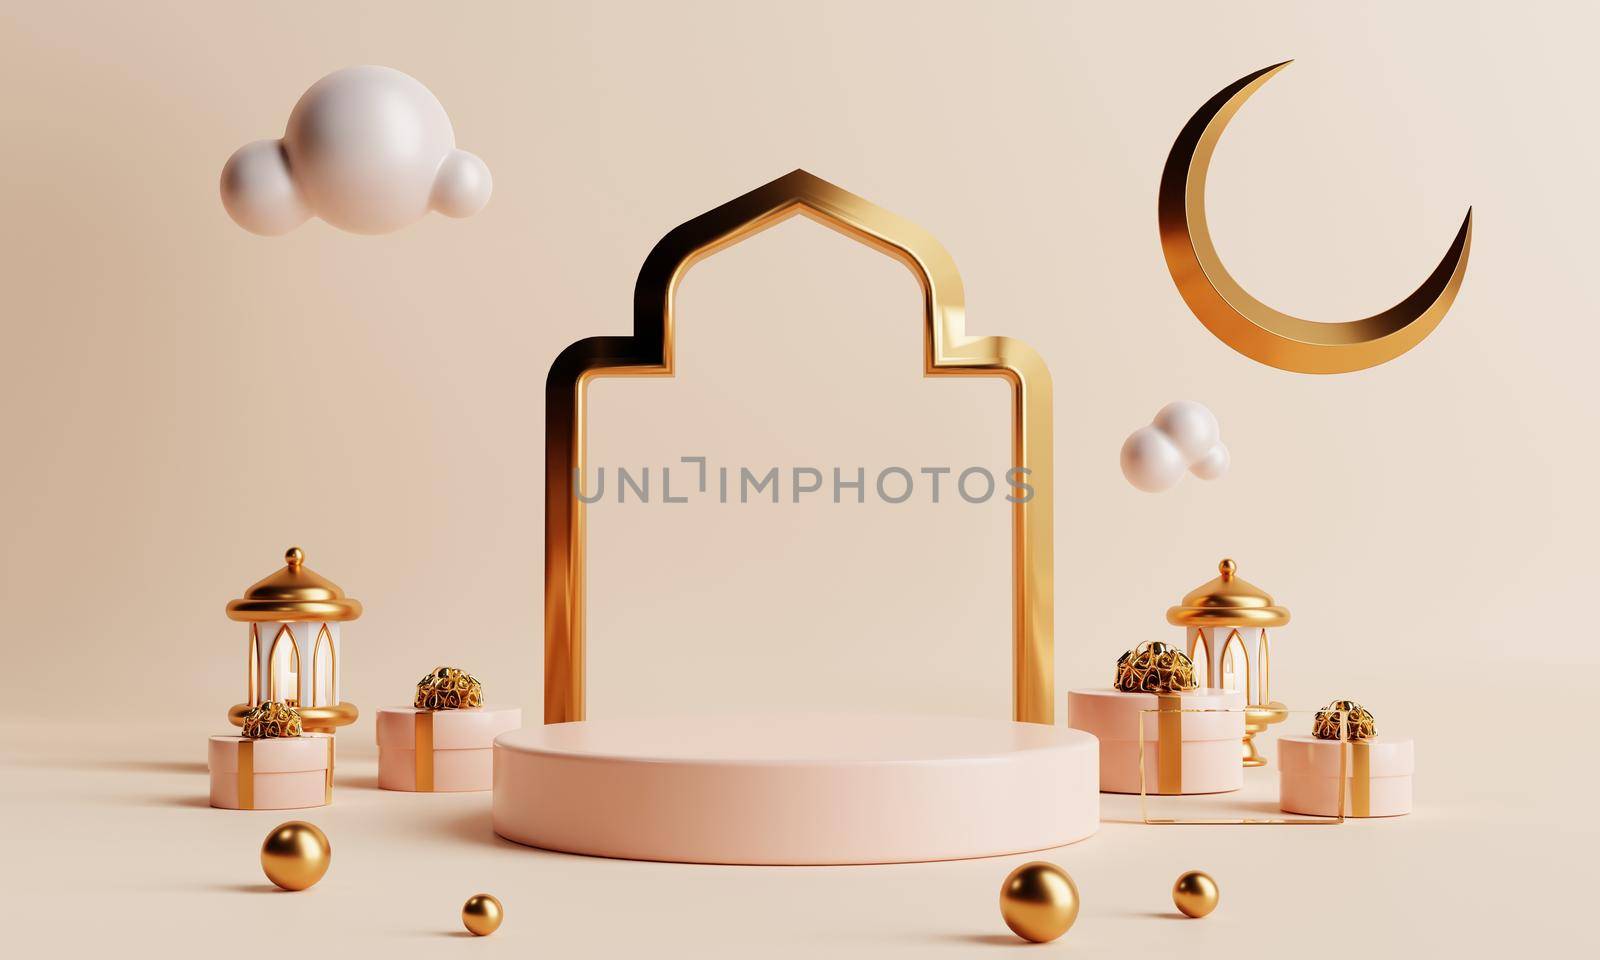 Minimal product podium in Ramadan or Eid Mubarak Islamic traditional culture style on coral color background. Holiday and Arabian festival concept. 3D illustration rendering